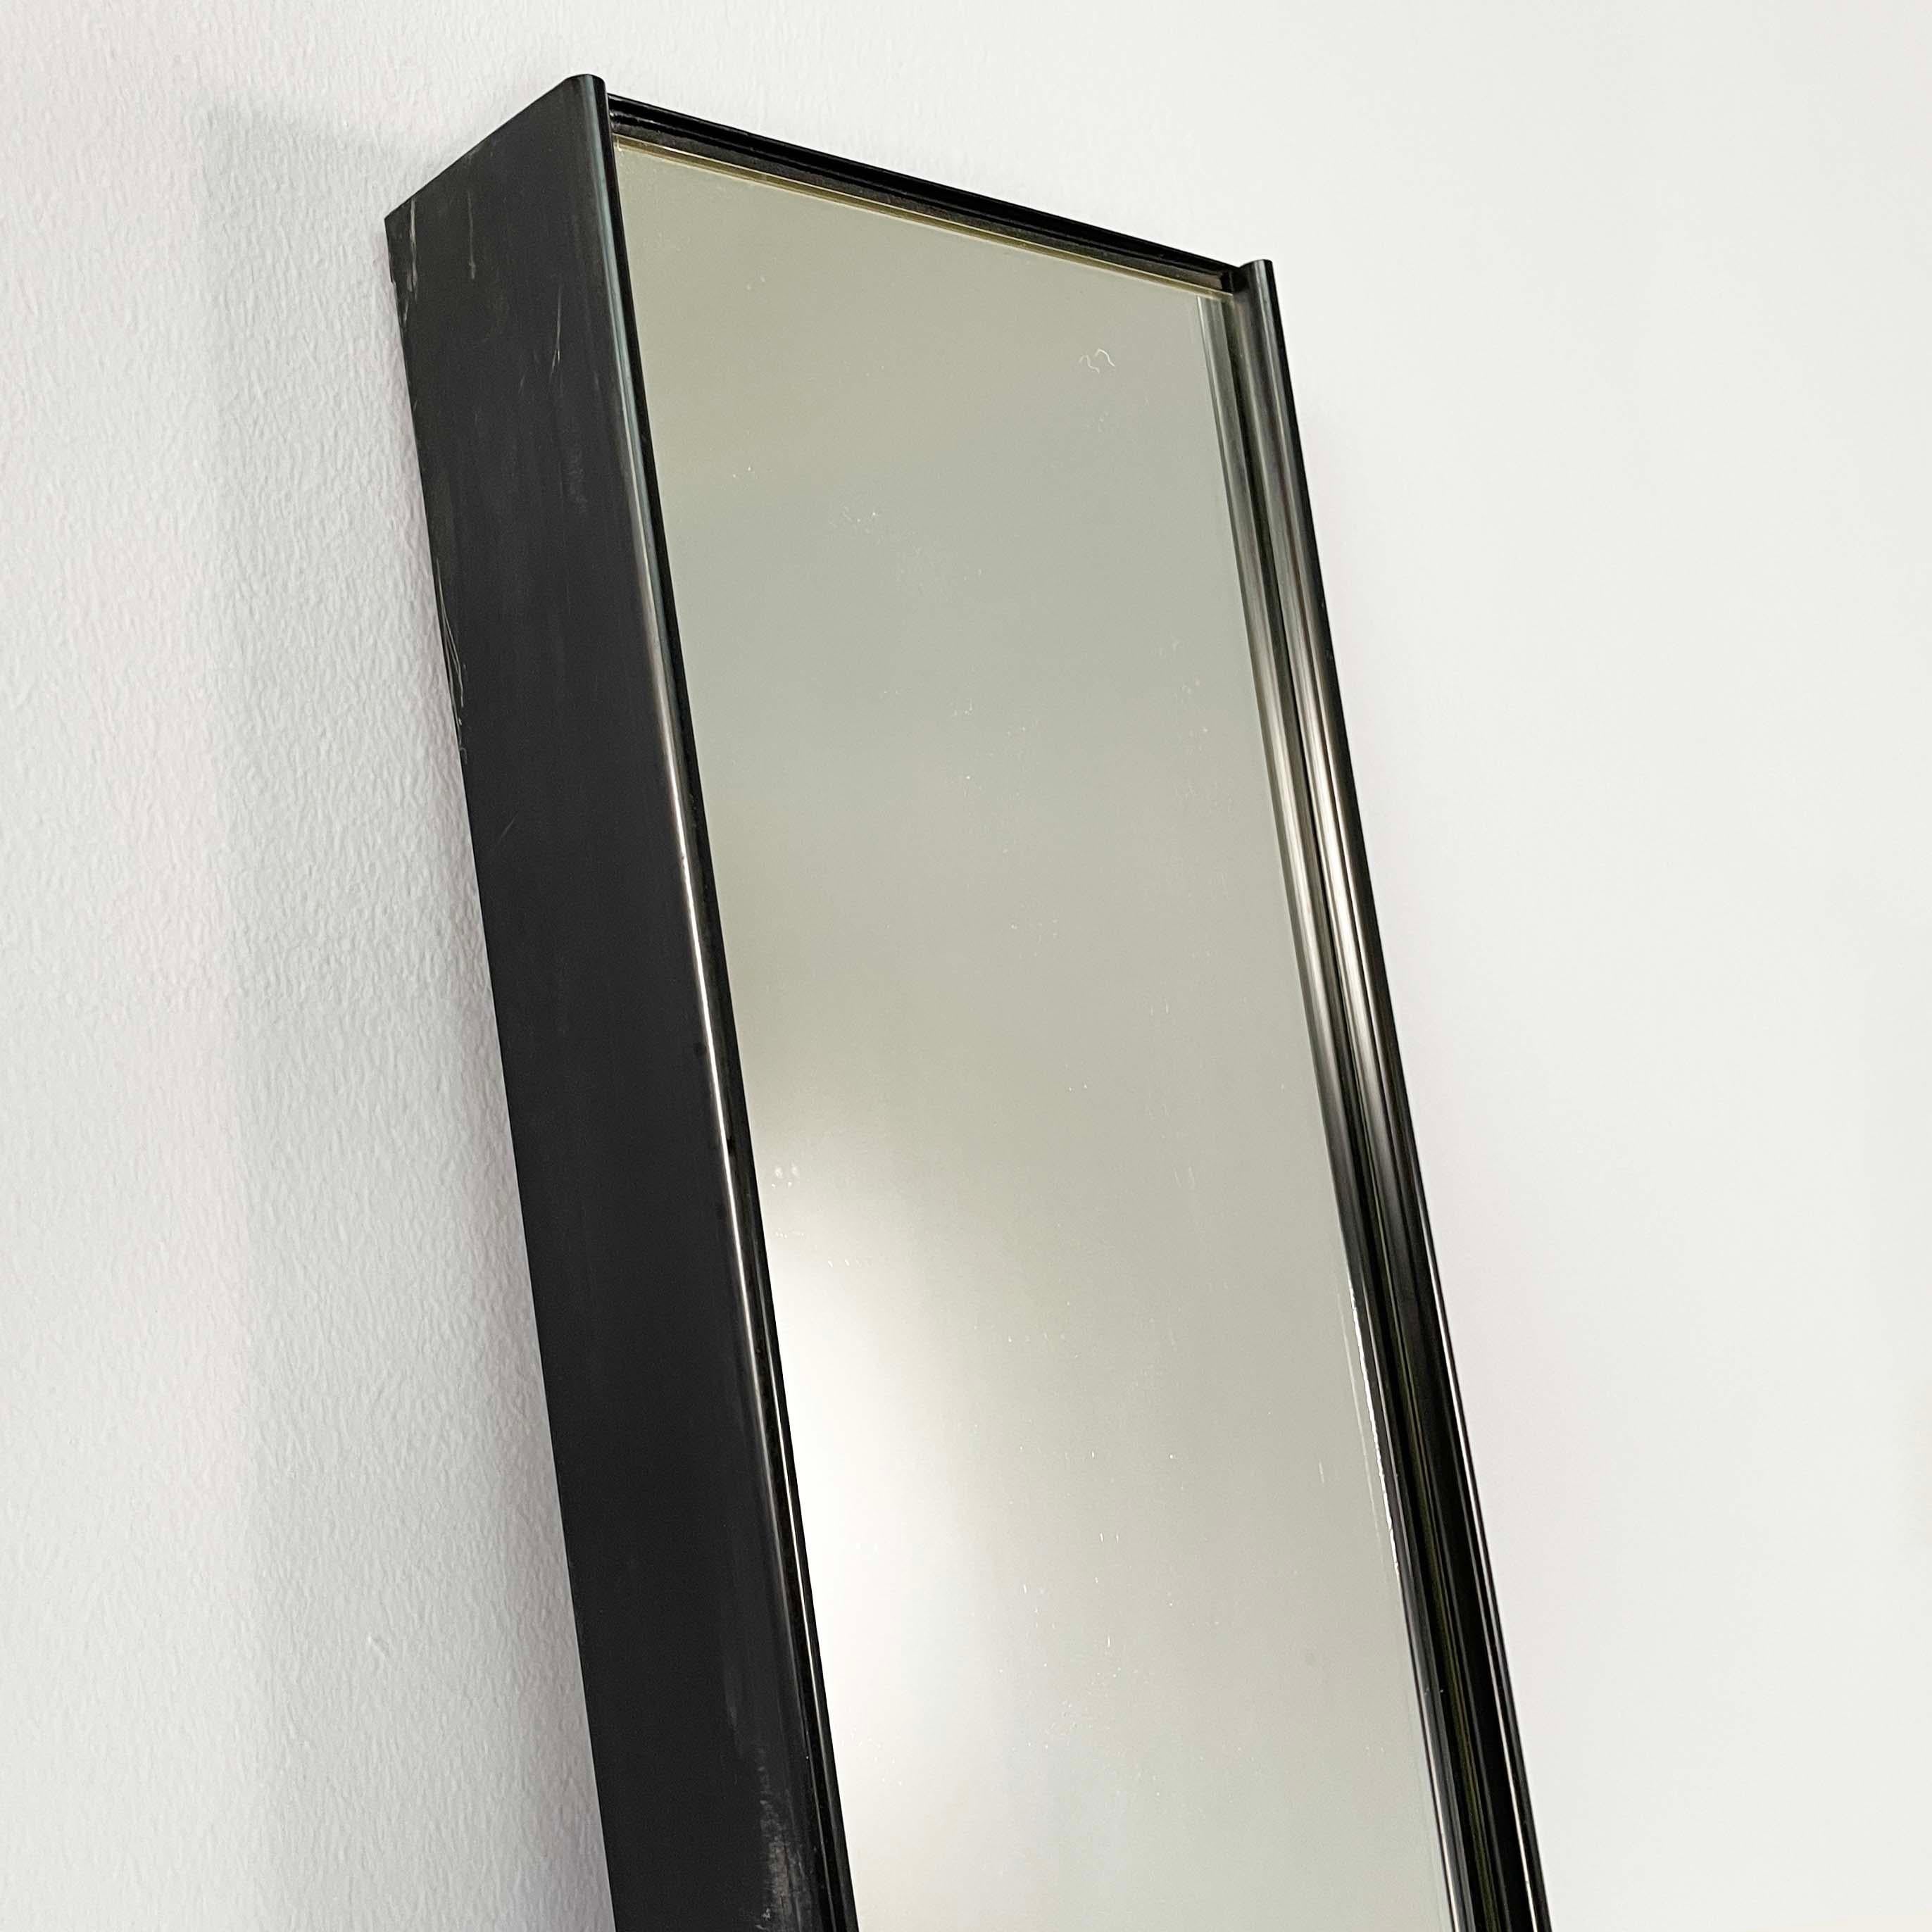 Italian modern Wall mirror hanger Gronda by Luciano Bertoncini for Elco, 1970s In Good Condition For Sale In MIlano, IT